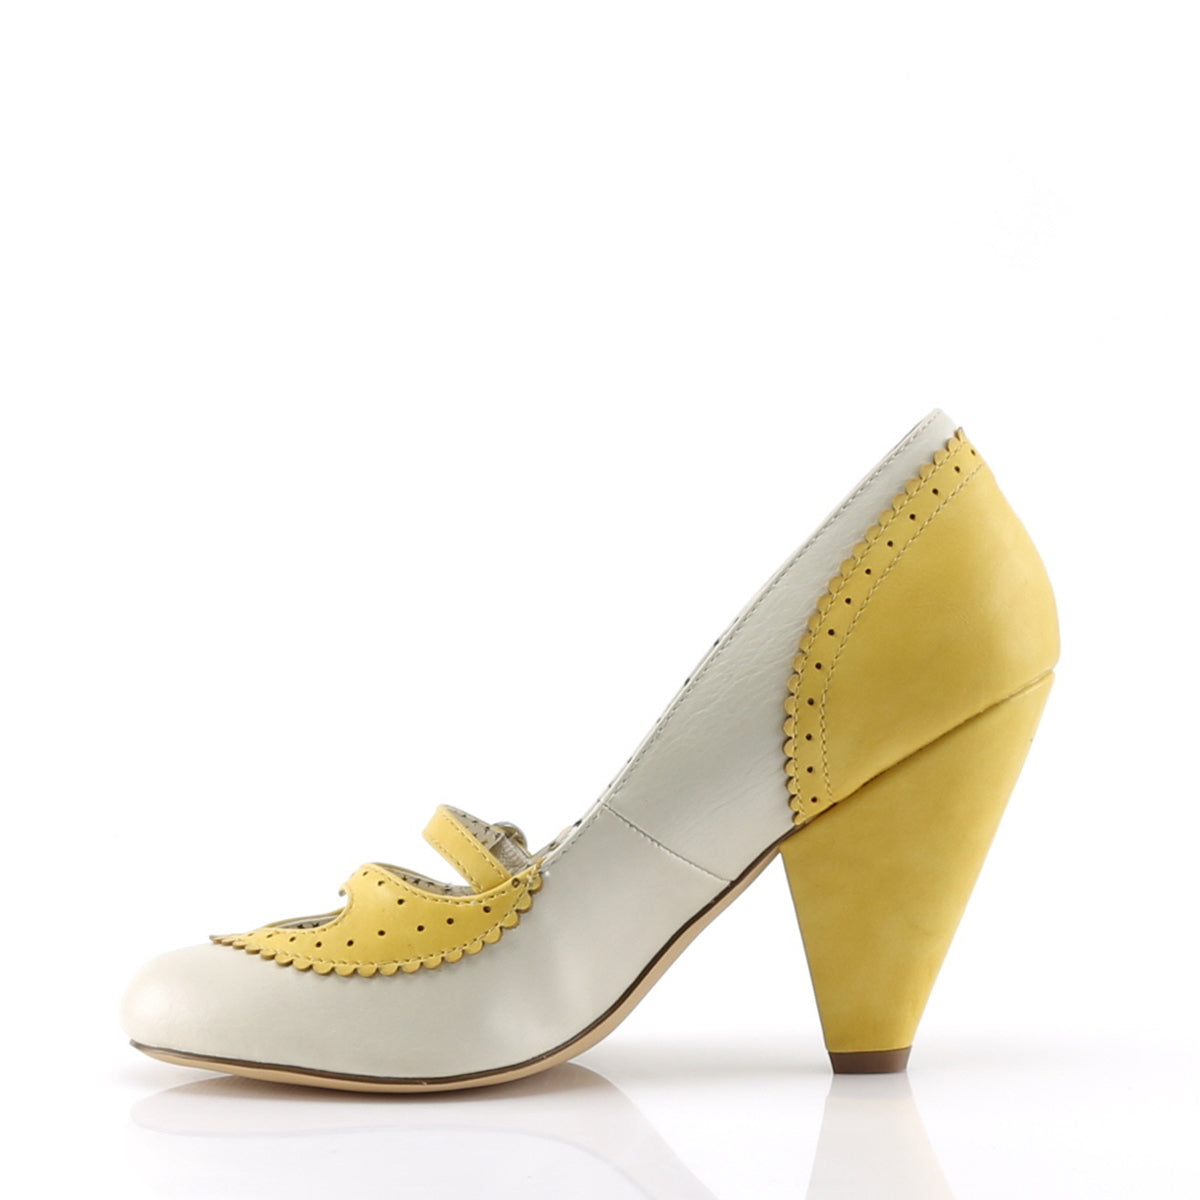 POPPY-18 Pin Up Couture Yellow-Cream Faux Leather Single Soles [Retro Glamour Shoes]